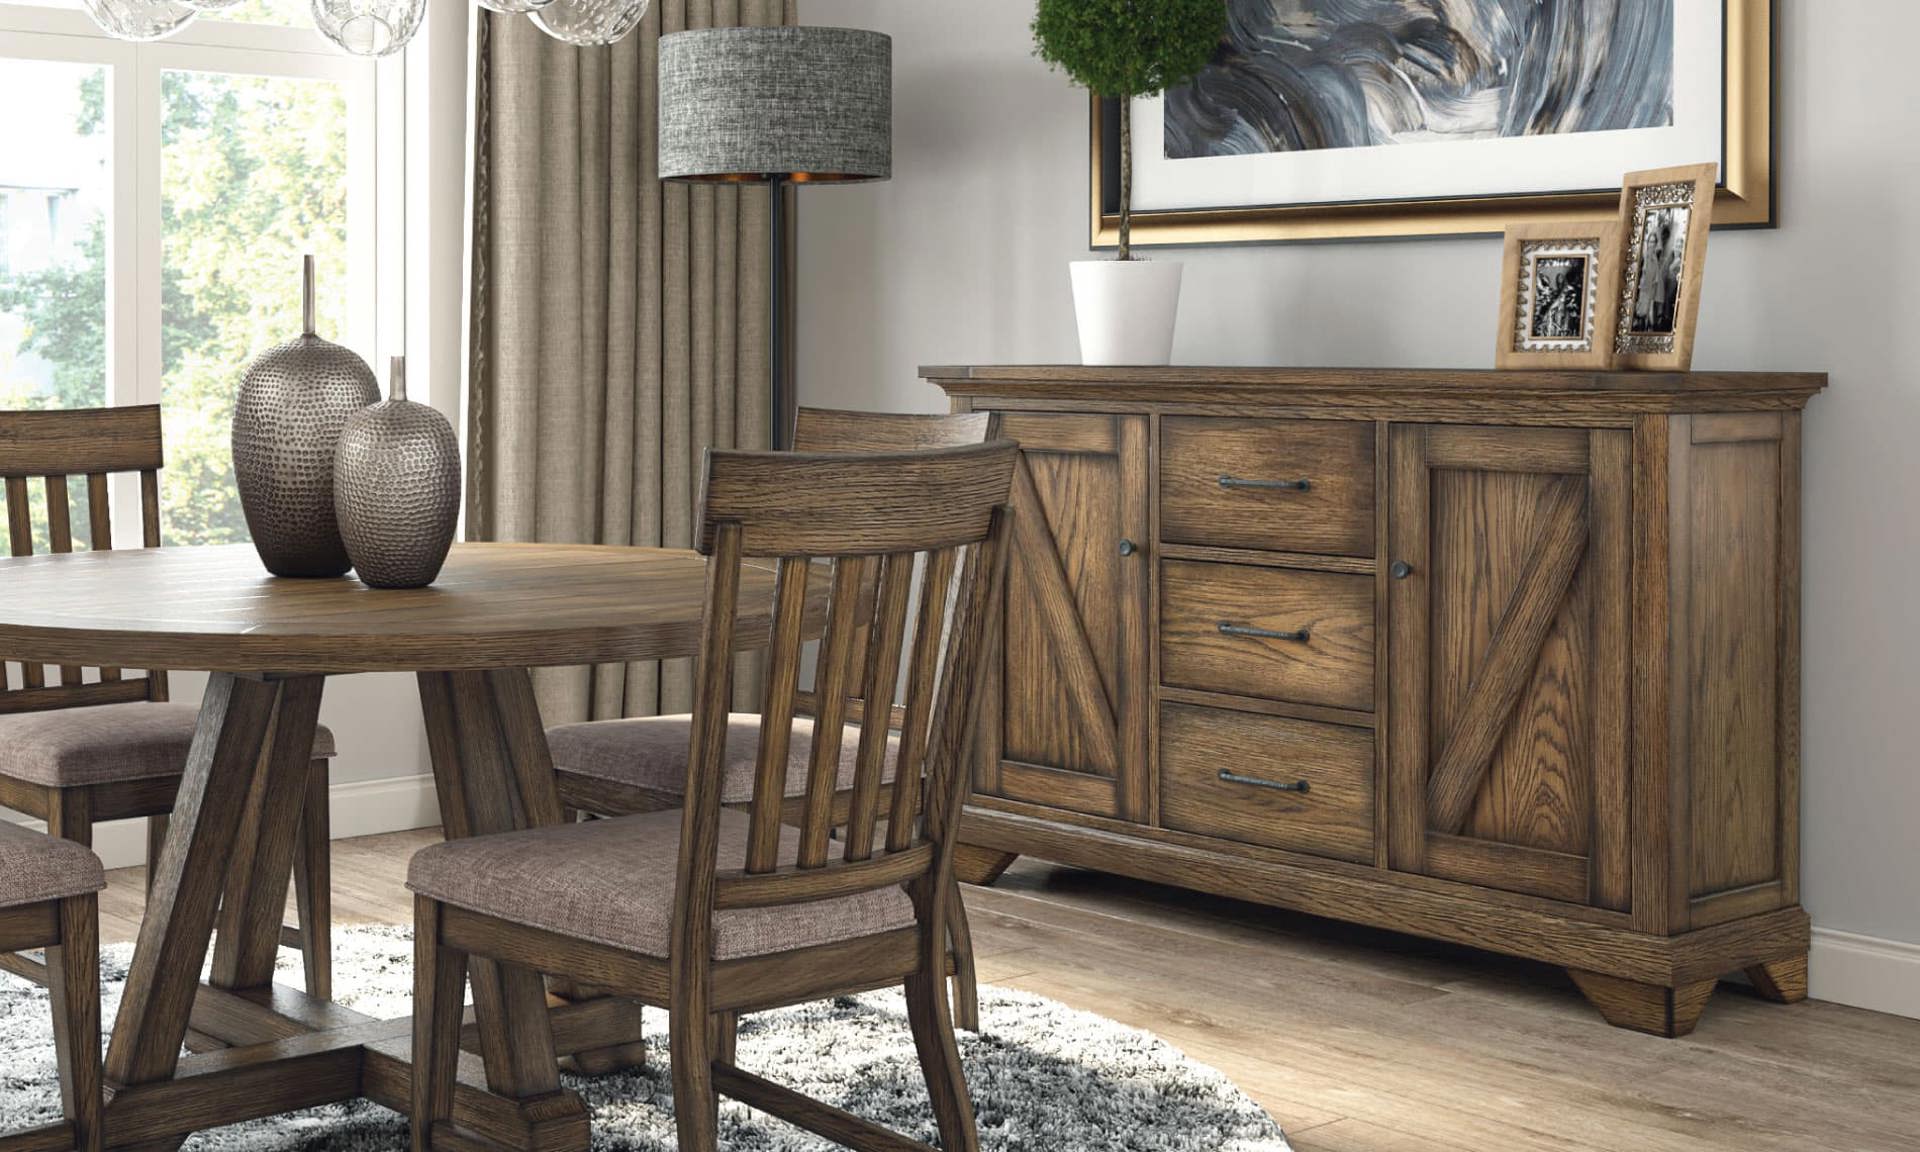 Find storage furniture that will look great in your dining room including china cabinets, sideboards, hutches and more.